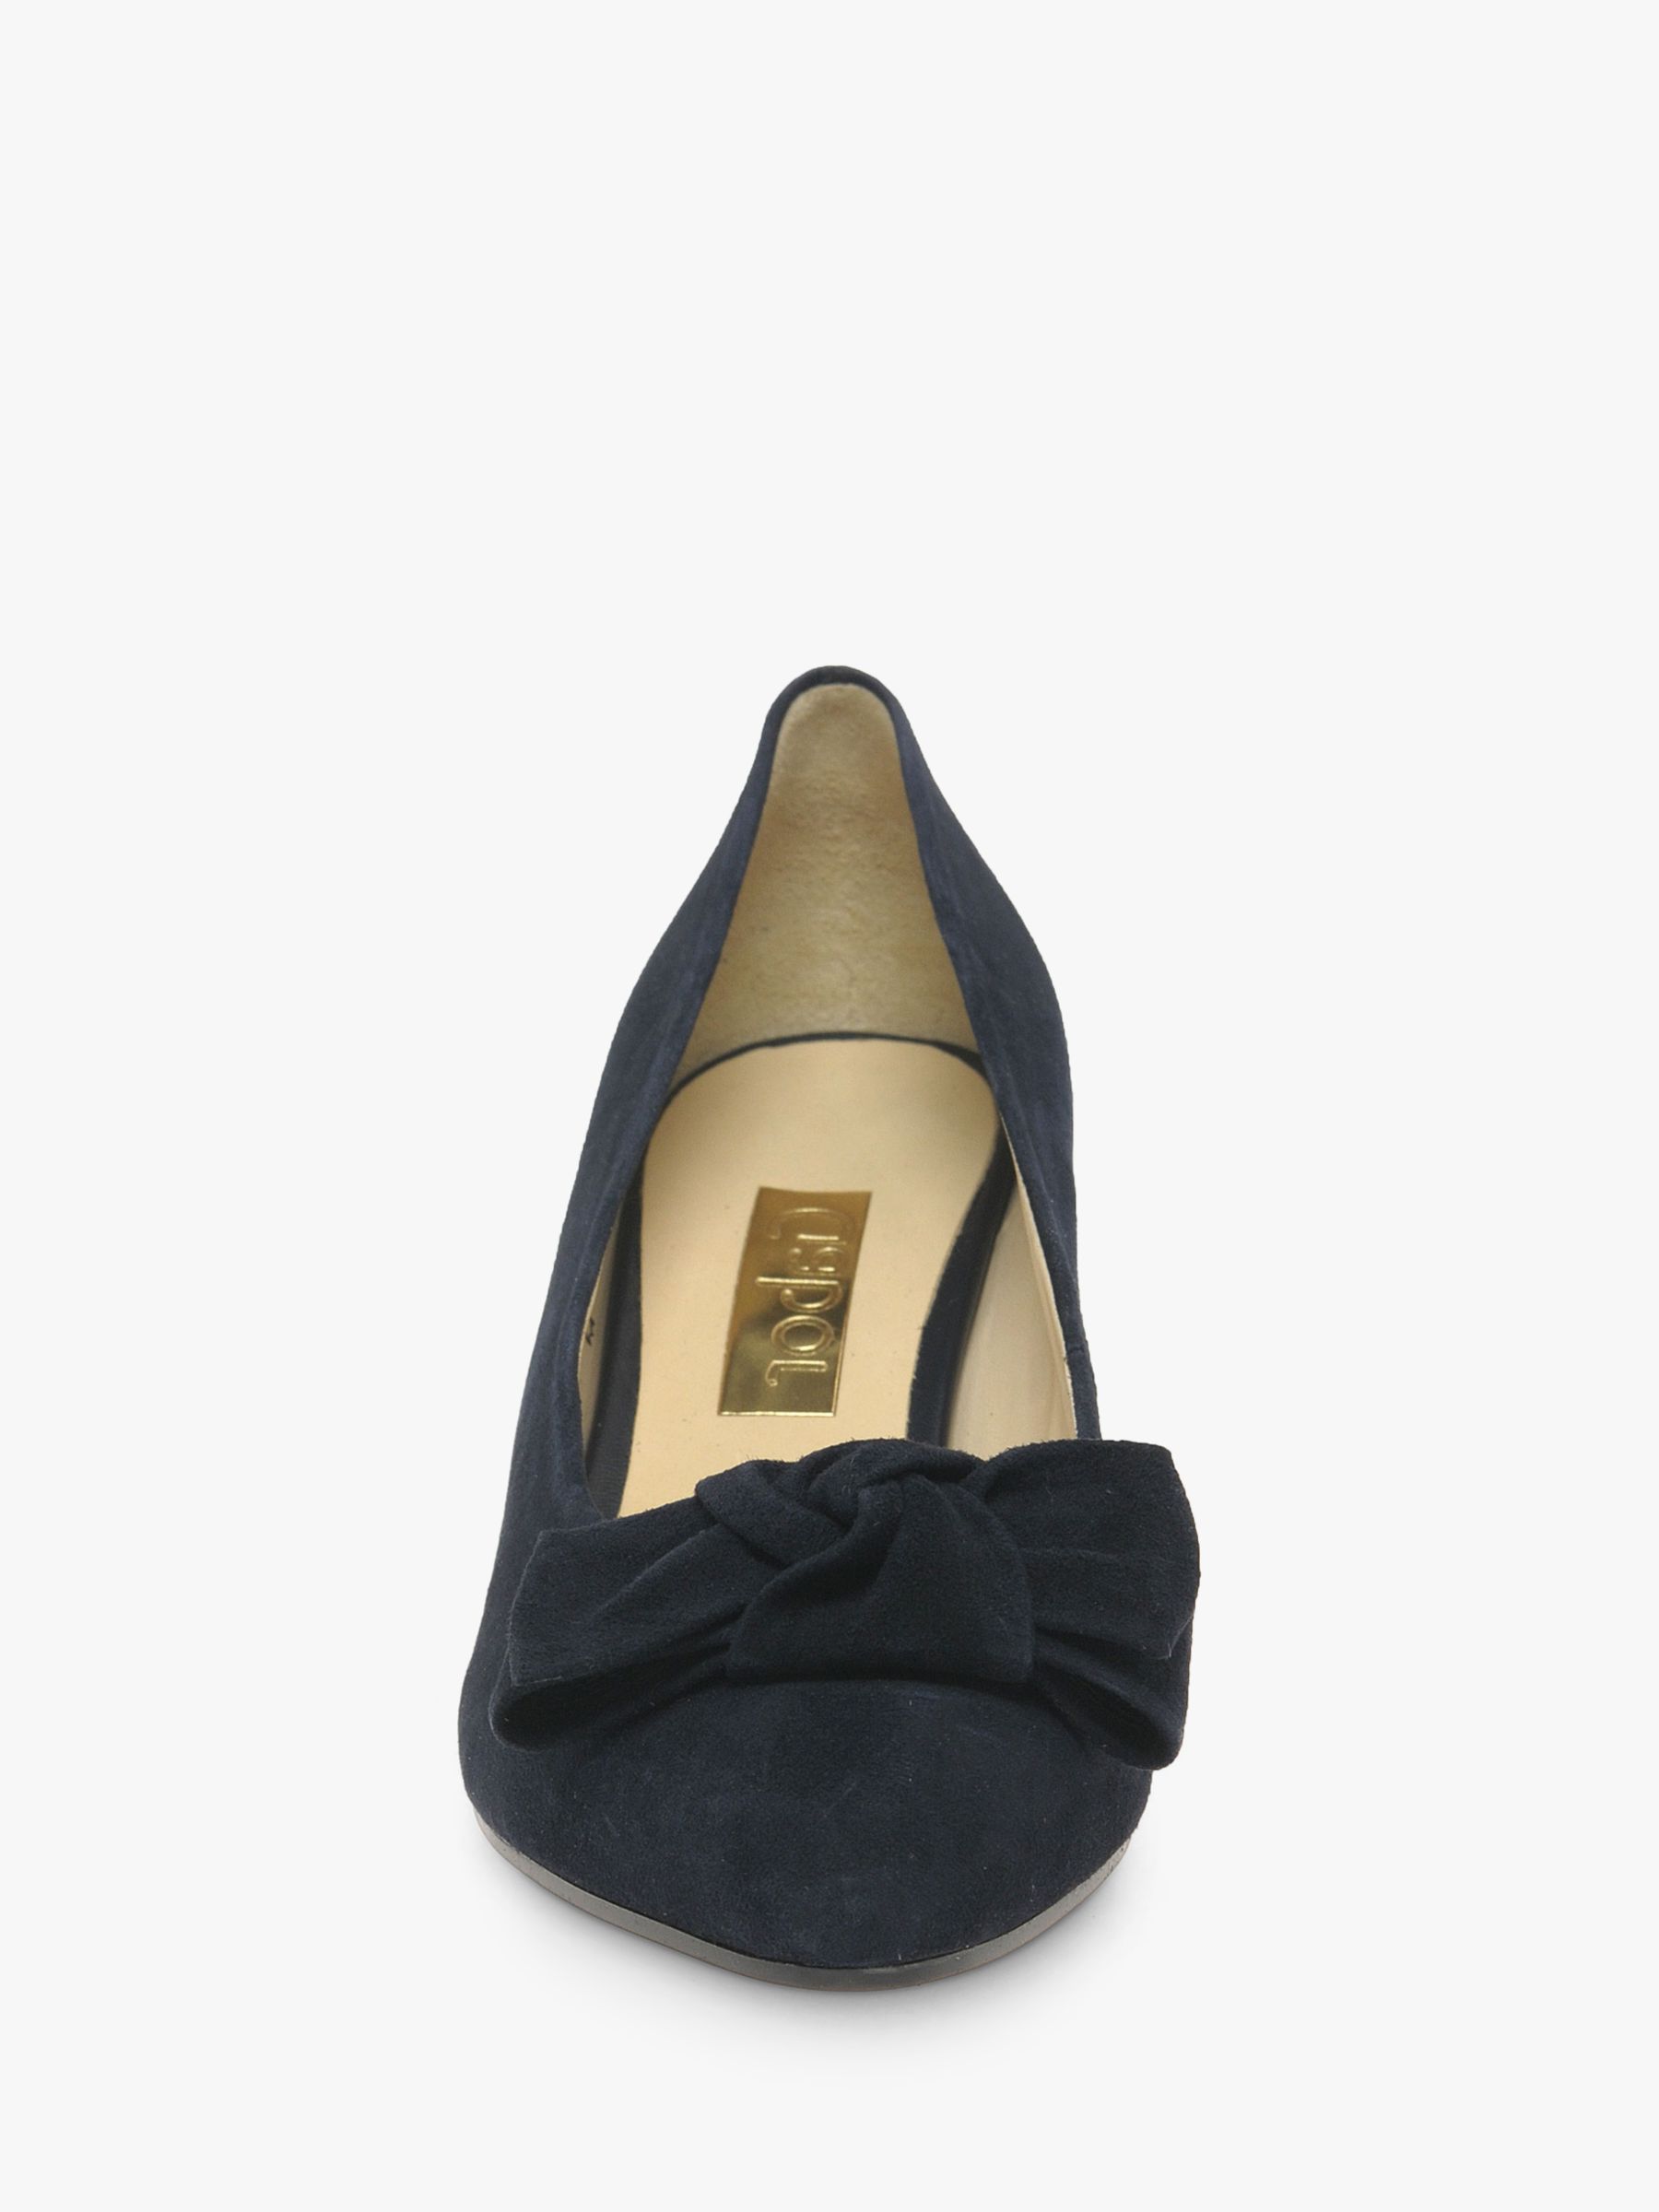 Gabor Kesh Suede Bow Detail Court Shoes, Navy at John & Partners